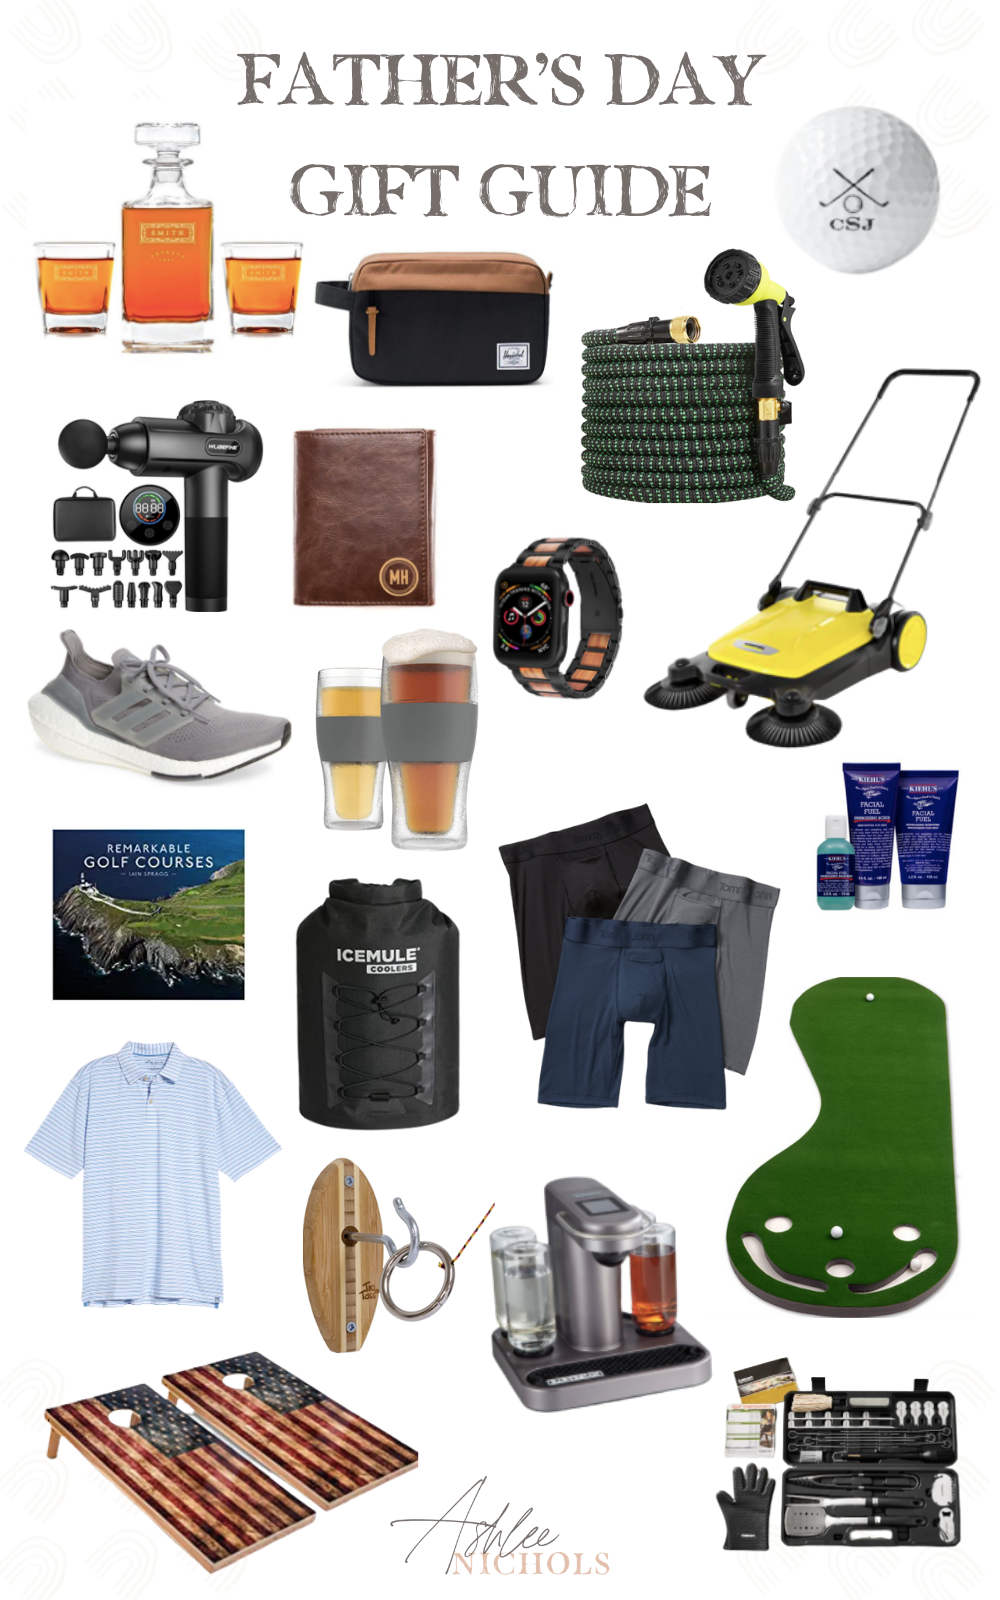 Father's Day gift guide: Shop 25 of our favorite items for golf-loving dads